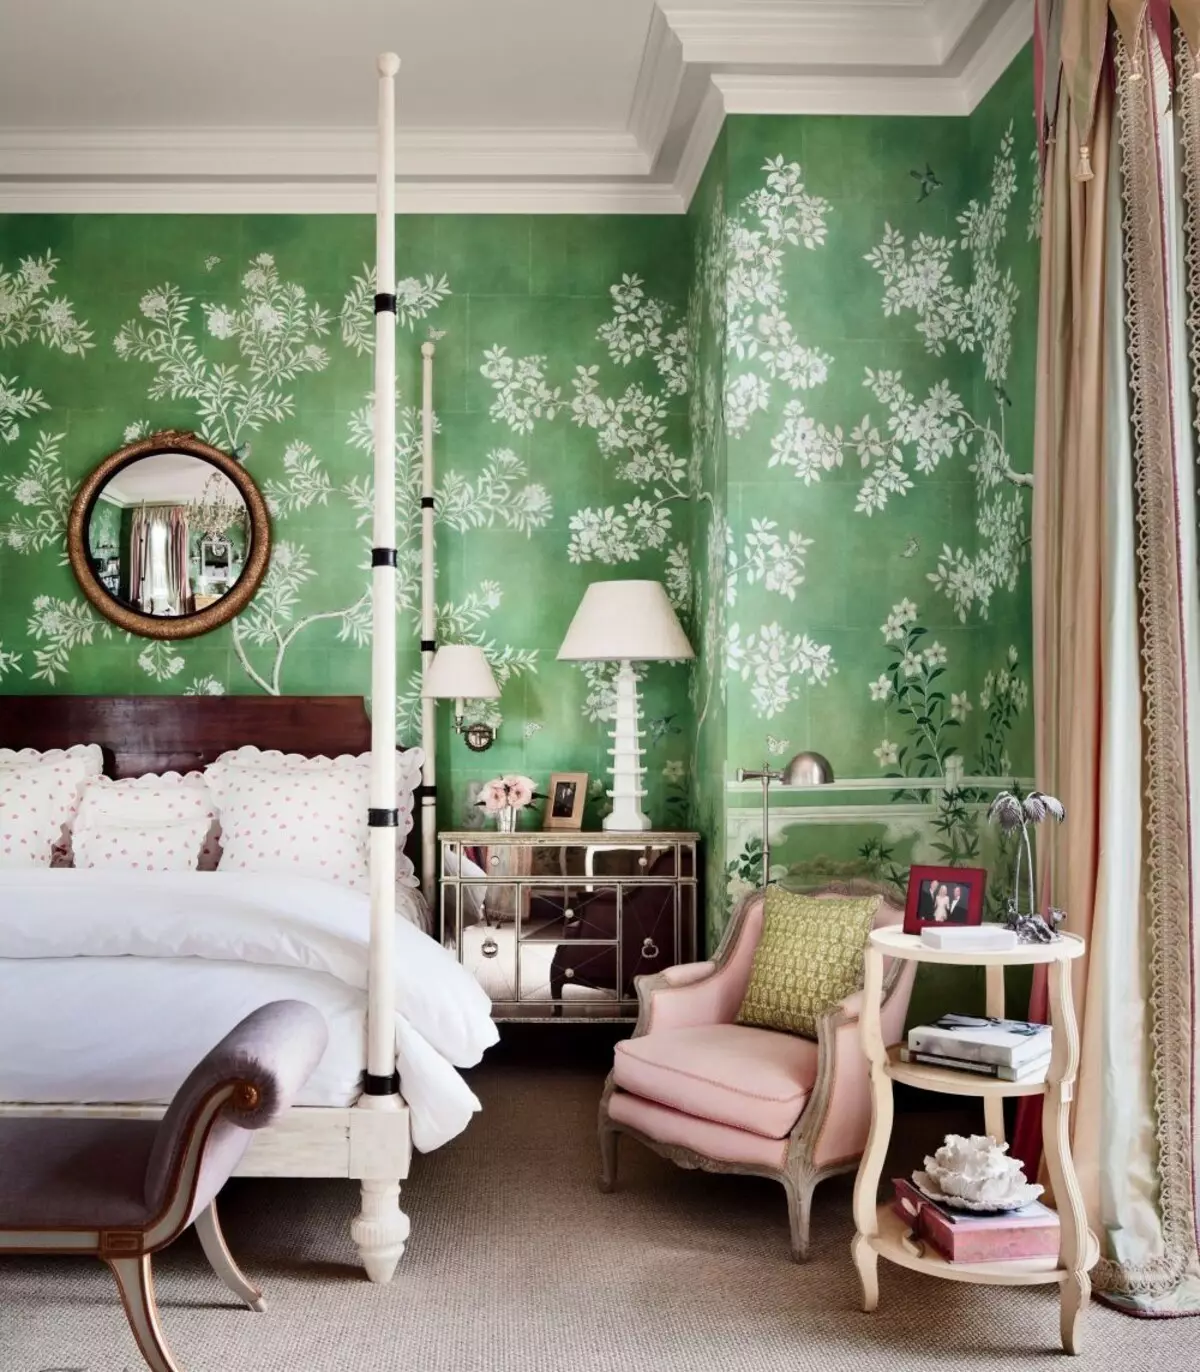 10 perfect combination of bedroom colors